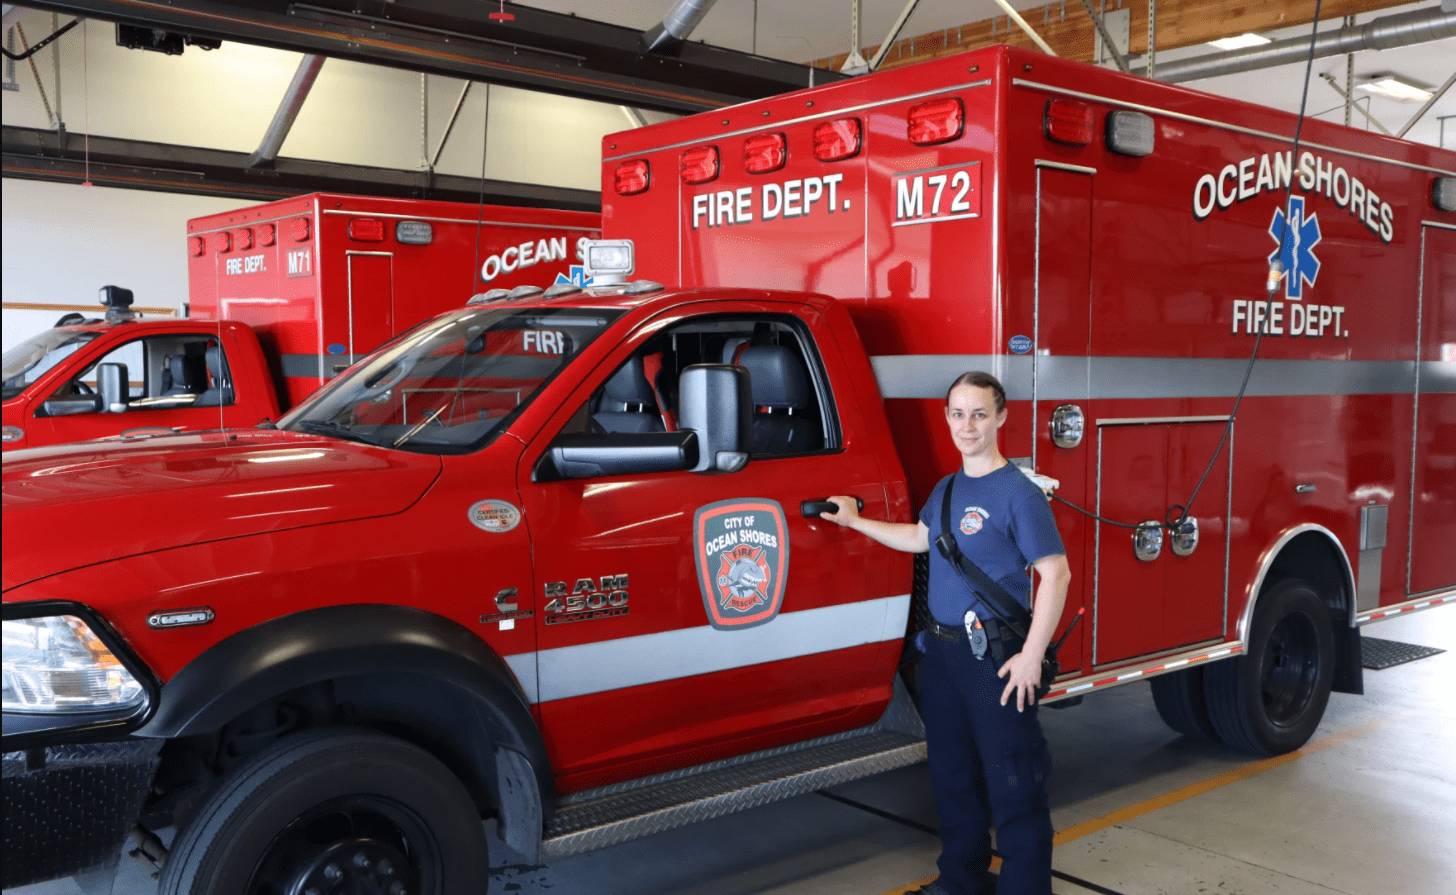 Ocean Shores firefighter/EMT Kara McDermott spends more time than usual behind to wheel of these ambulances as overwhelmed hospitals routinely divert incoming transports.